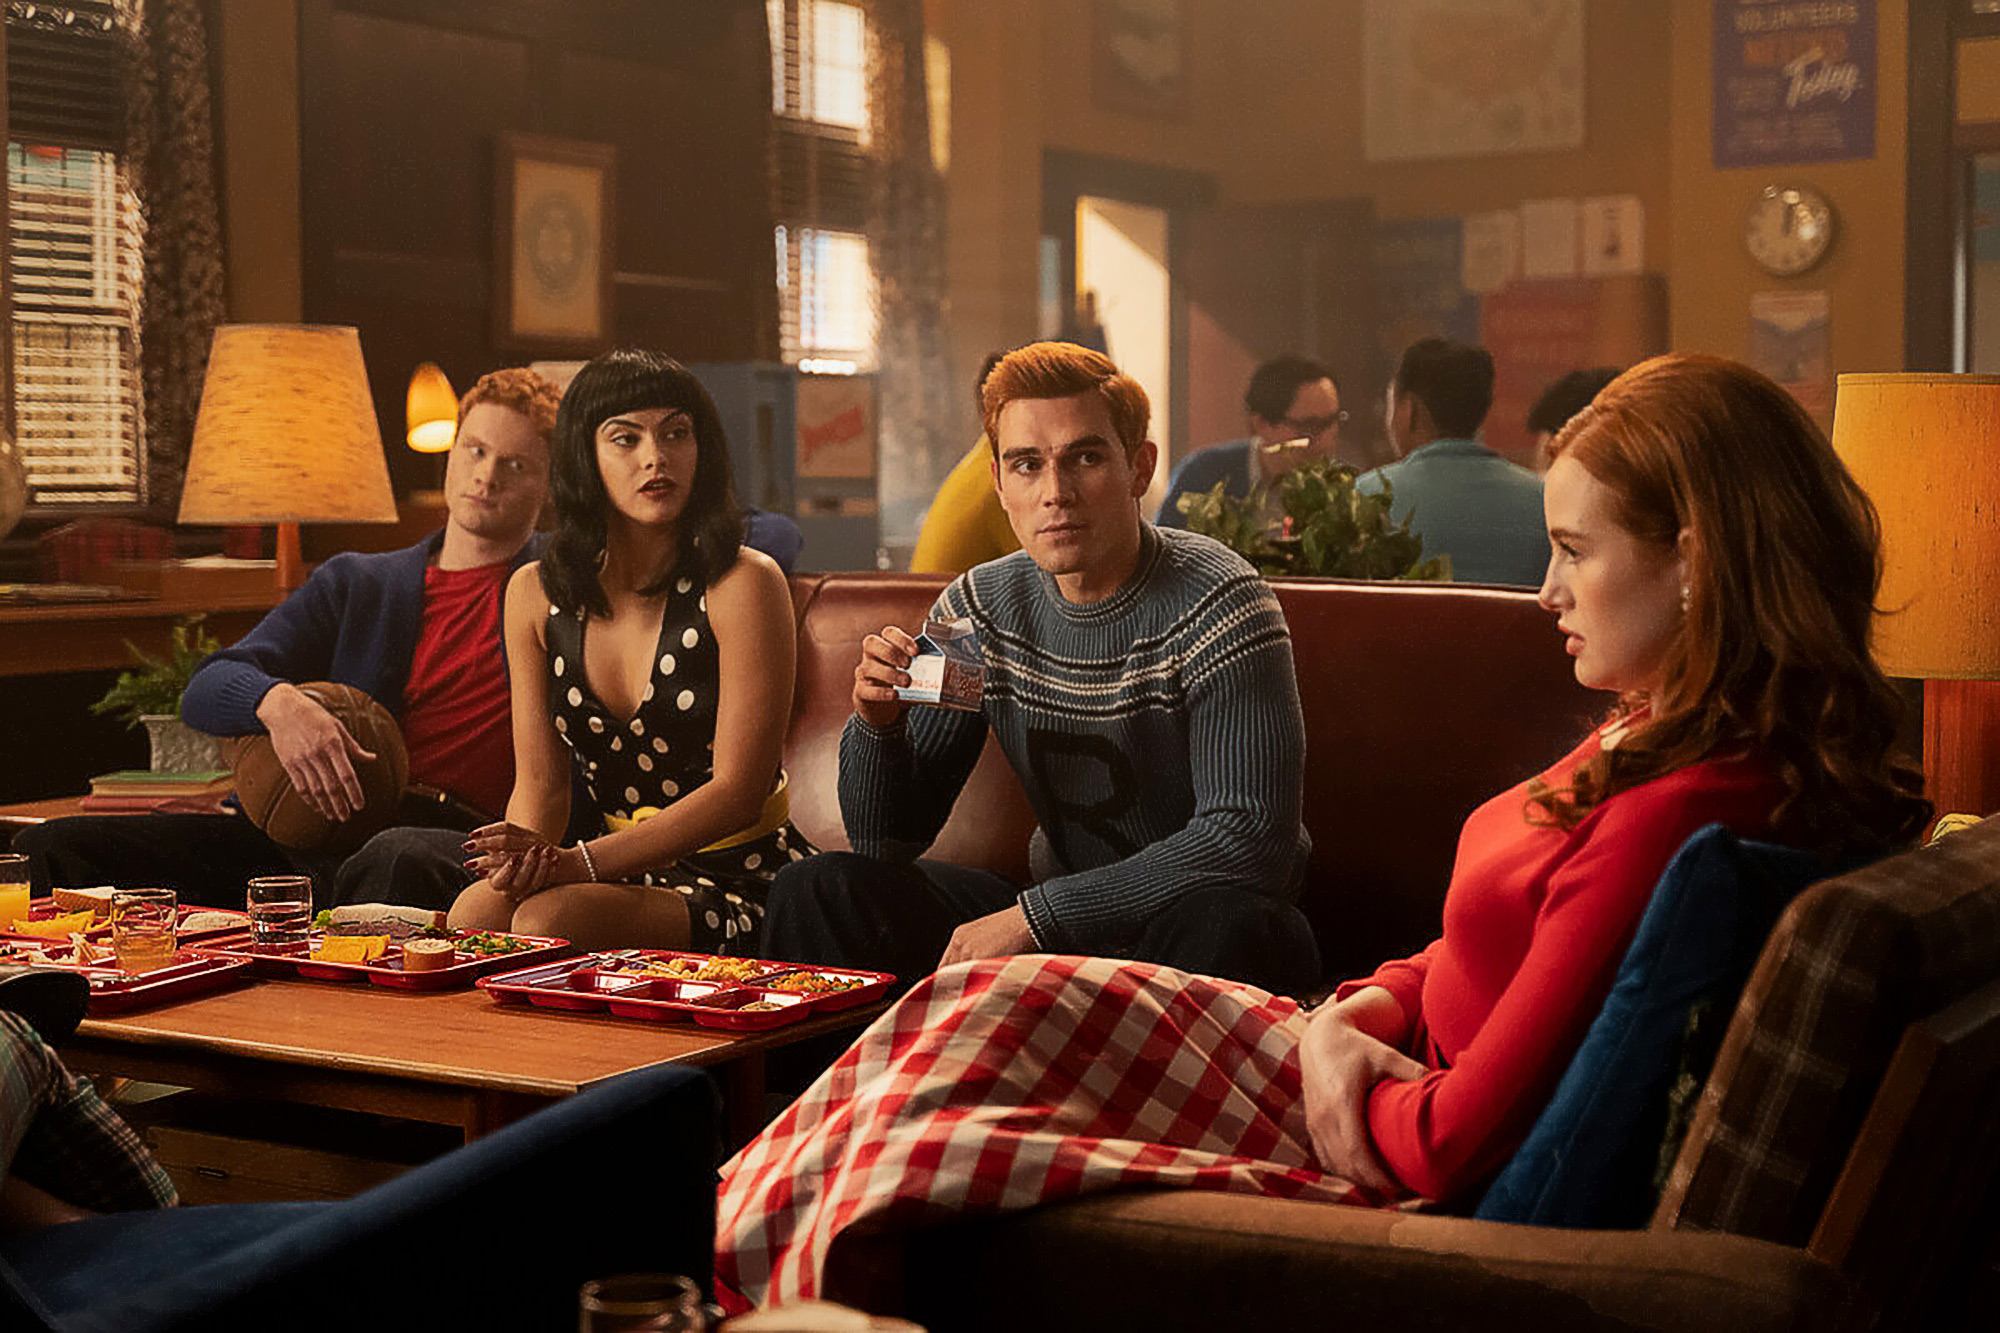 Dark Betty Is Back On 'Riverdale' Minus The Wig, And There's More To Come